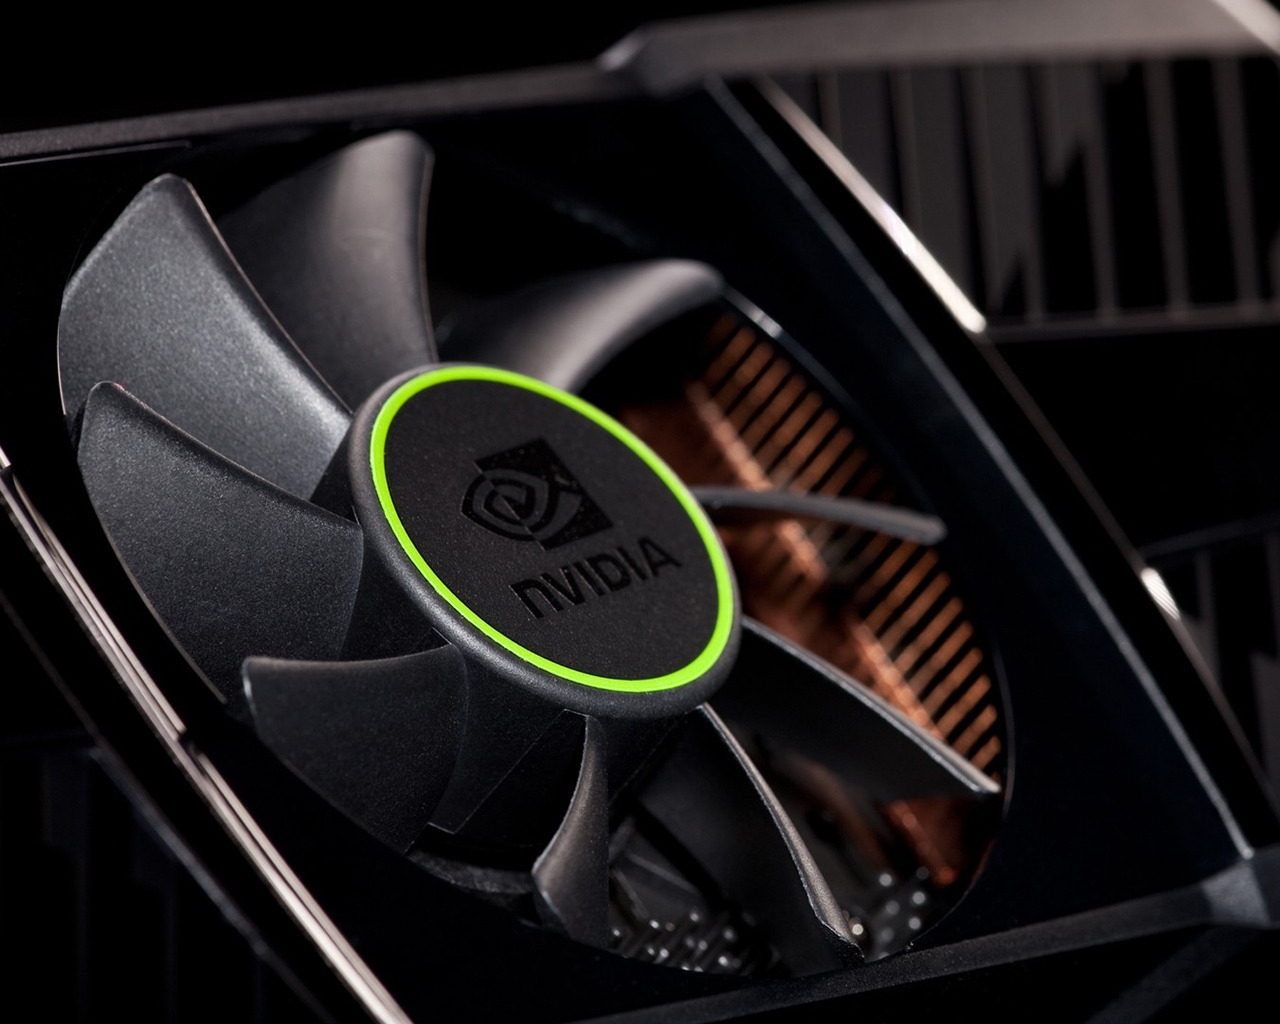 nVidia Cooler for 1280 x 1024 resolution